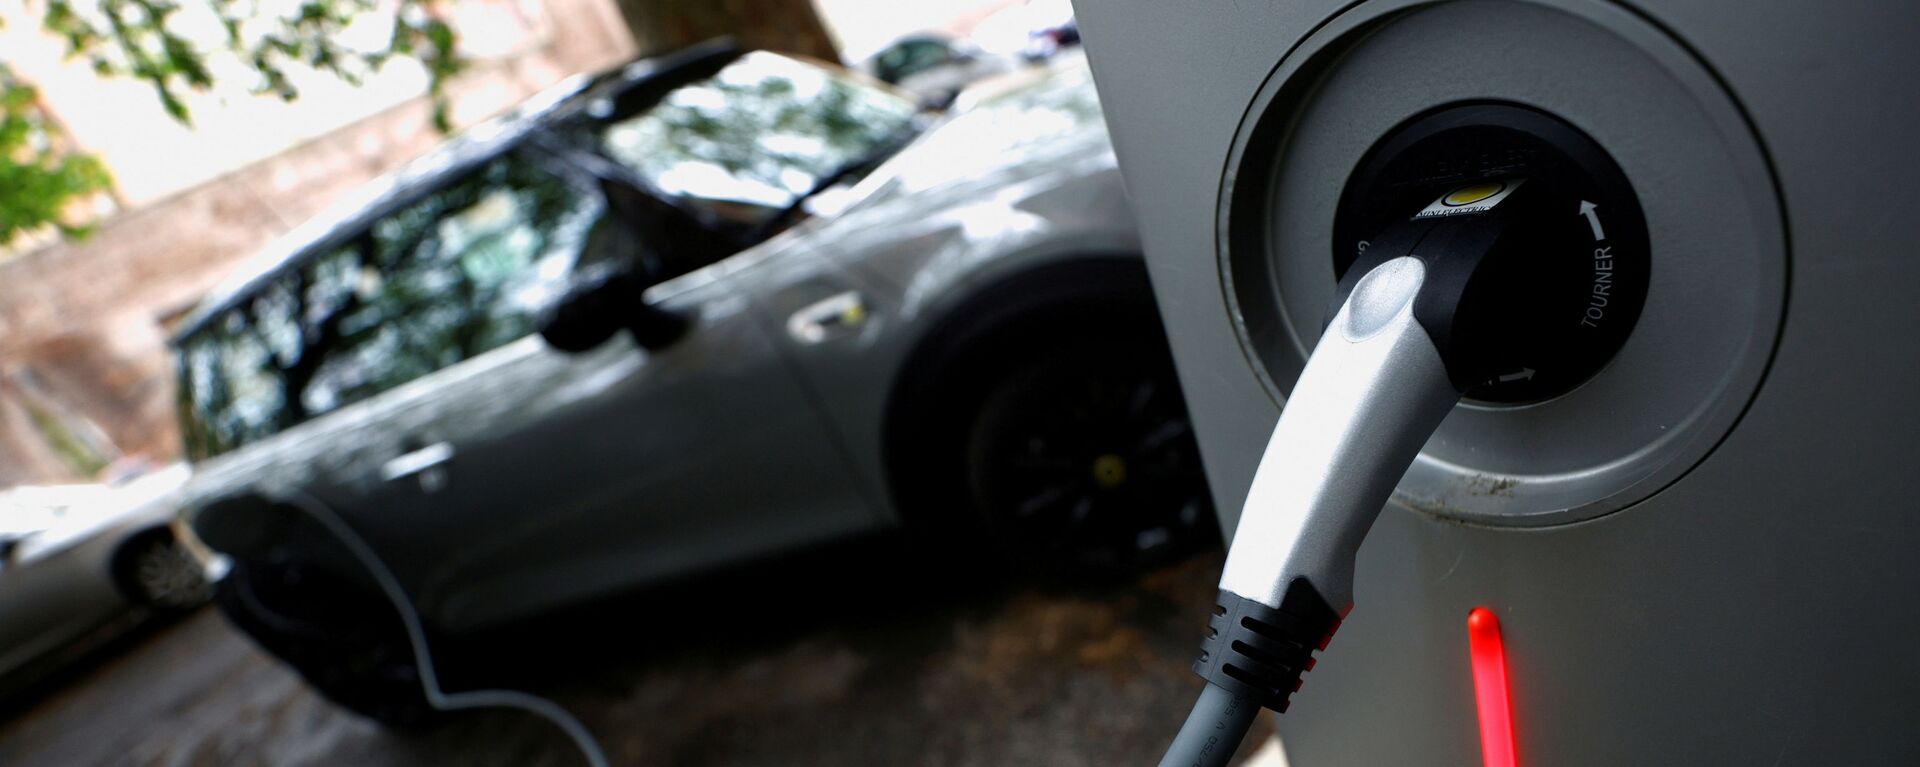 An electric car is seen plugged in at a charging point for electric vehicles (File) - Sputnik International, 1920, 06.09.2021